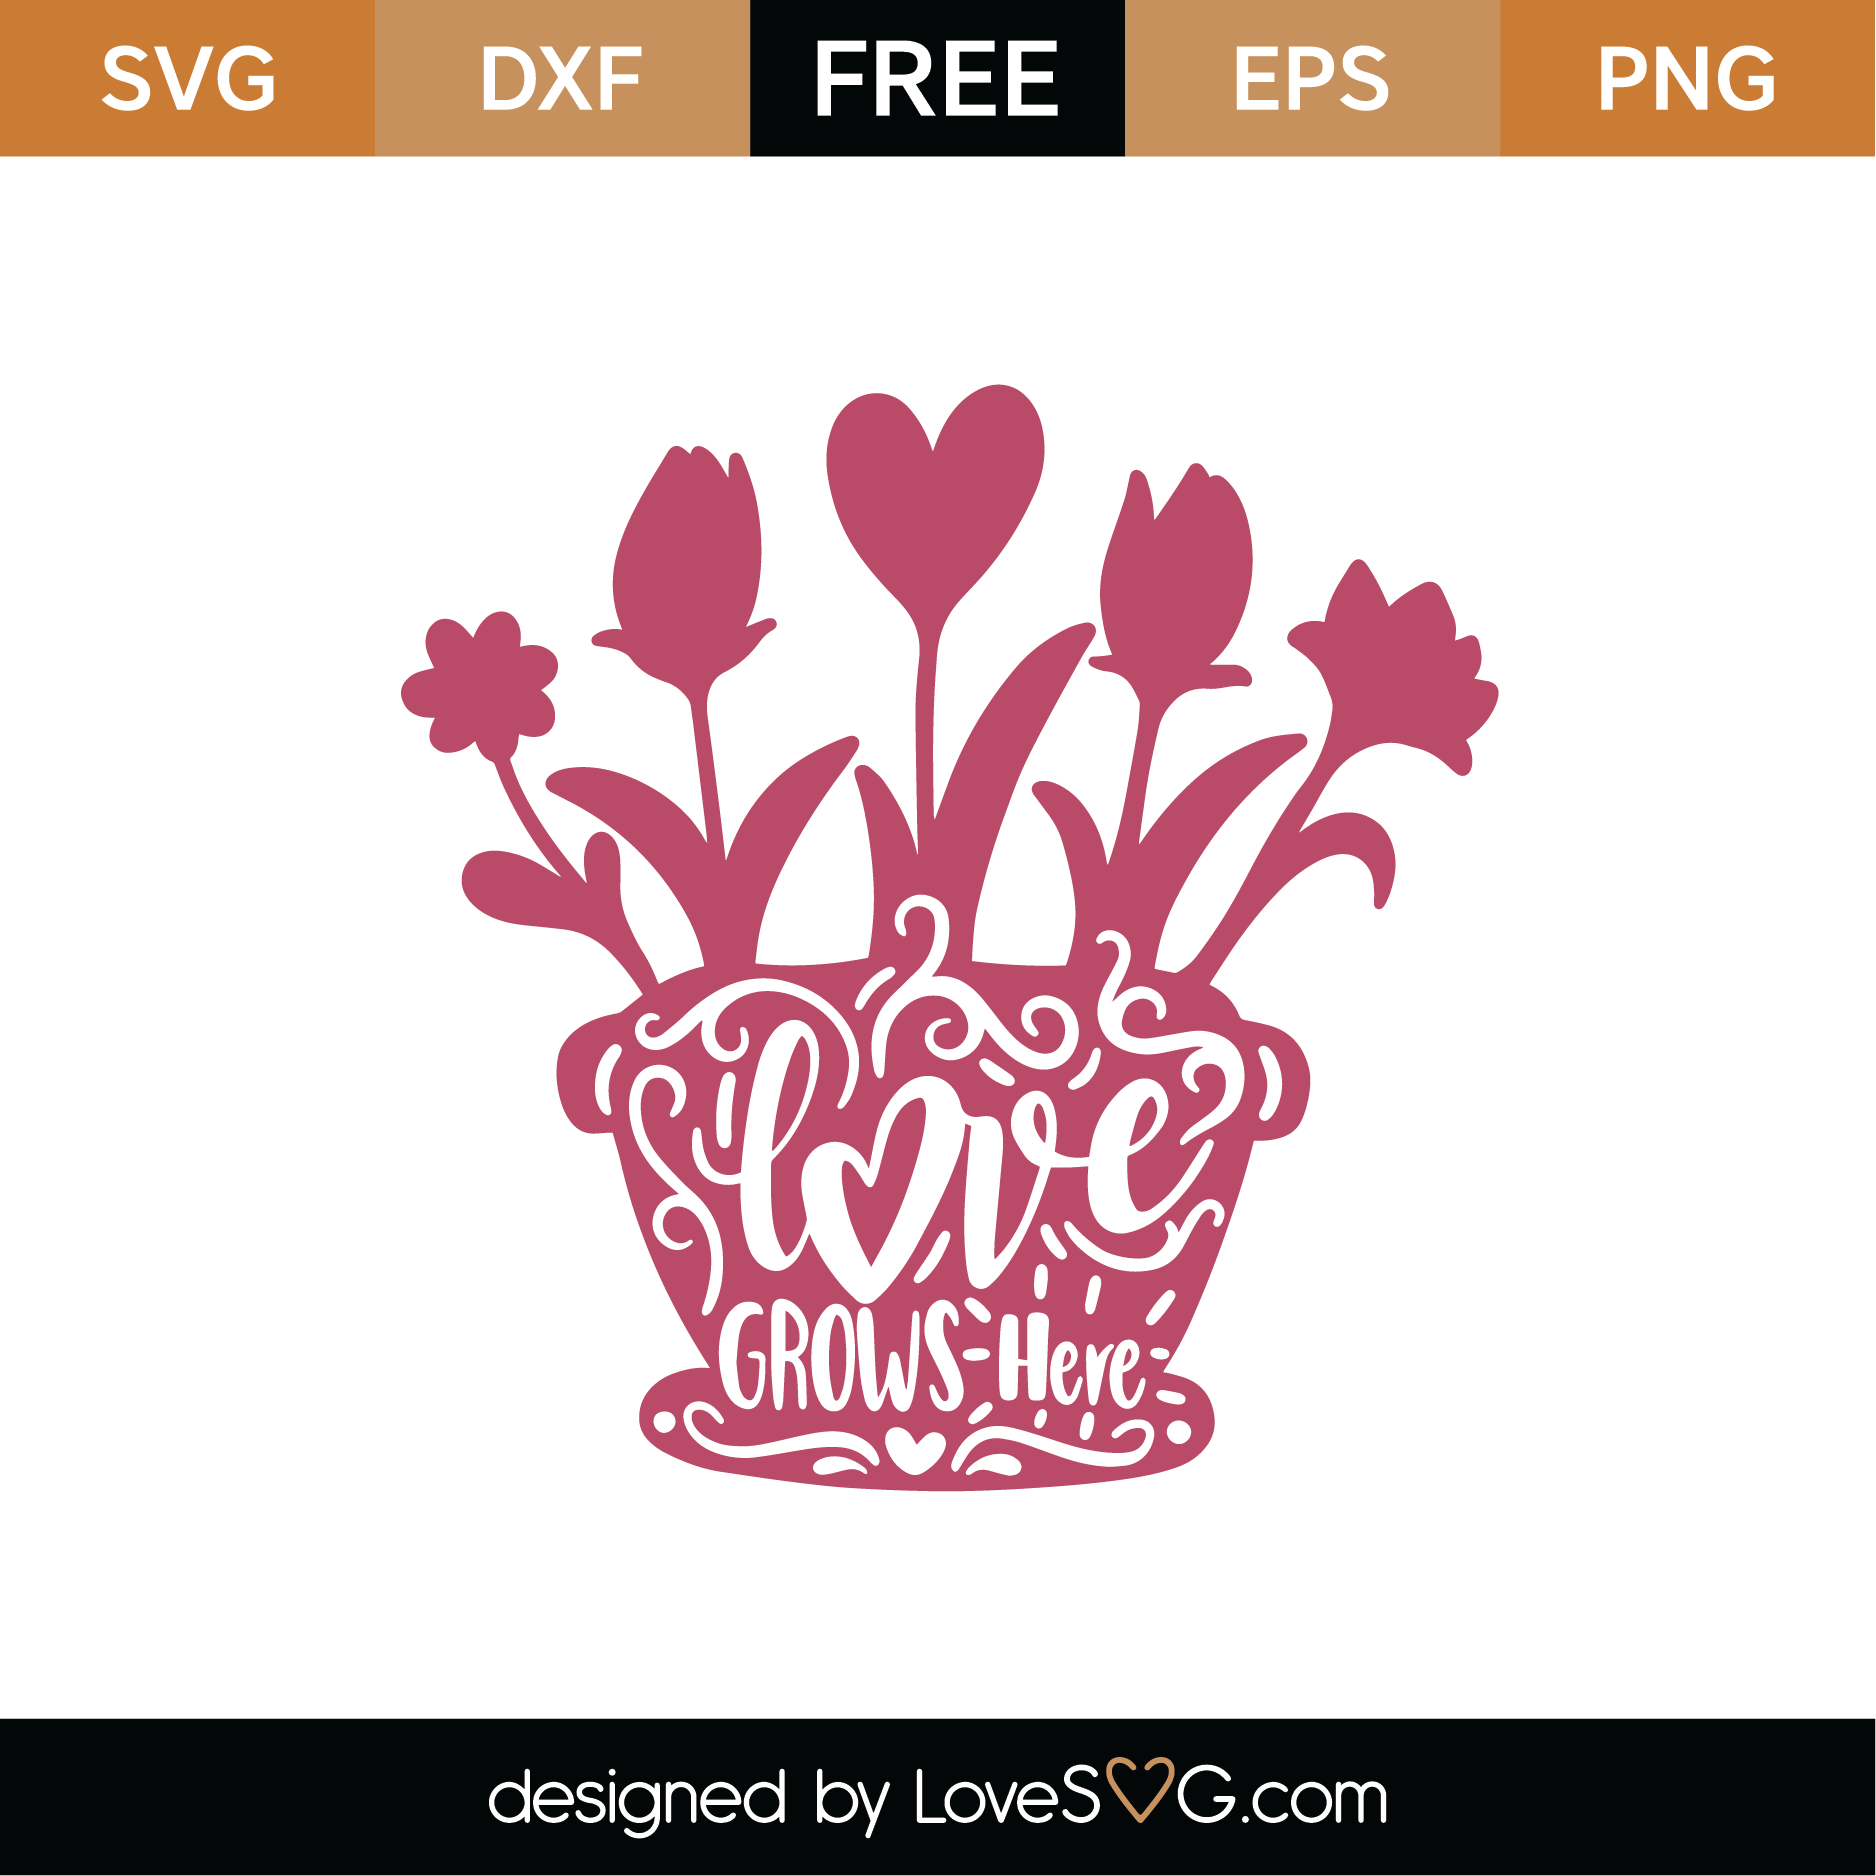 Download Free Love Grows Here SVG Cut File | Lovesvg.com